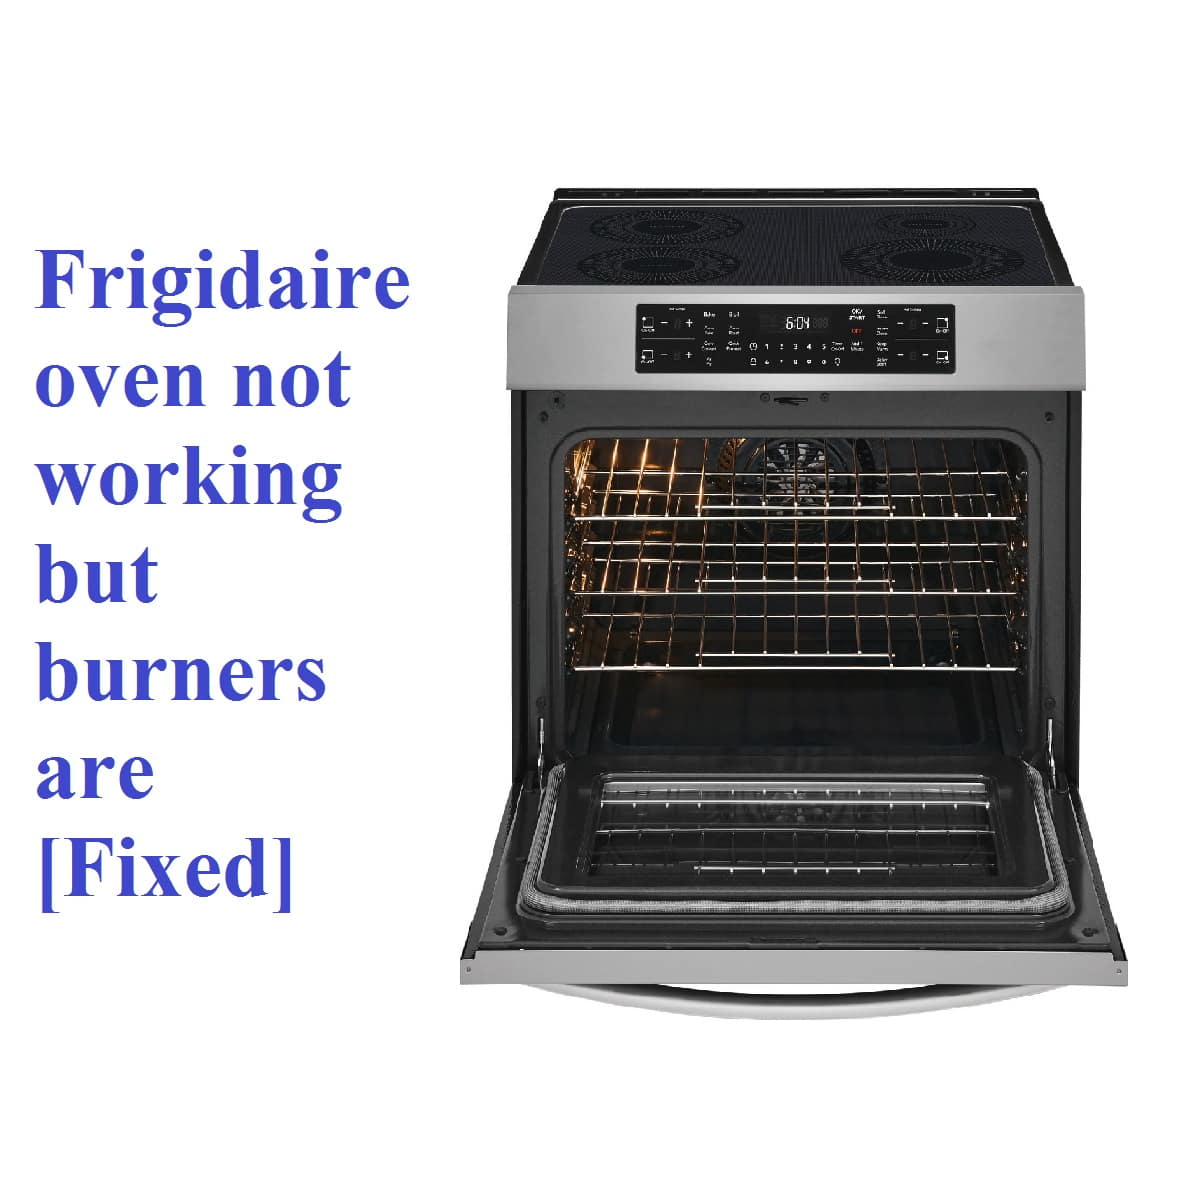 Frigidaire oven not working but burners are